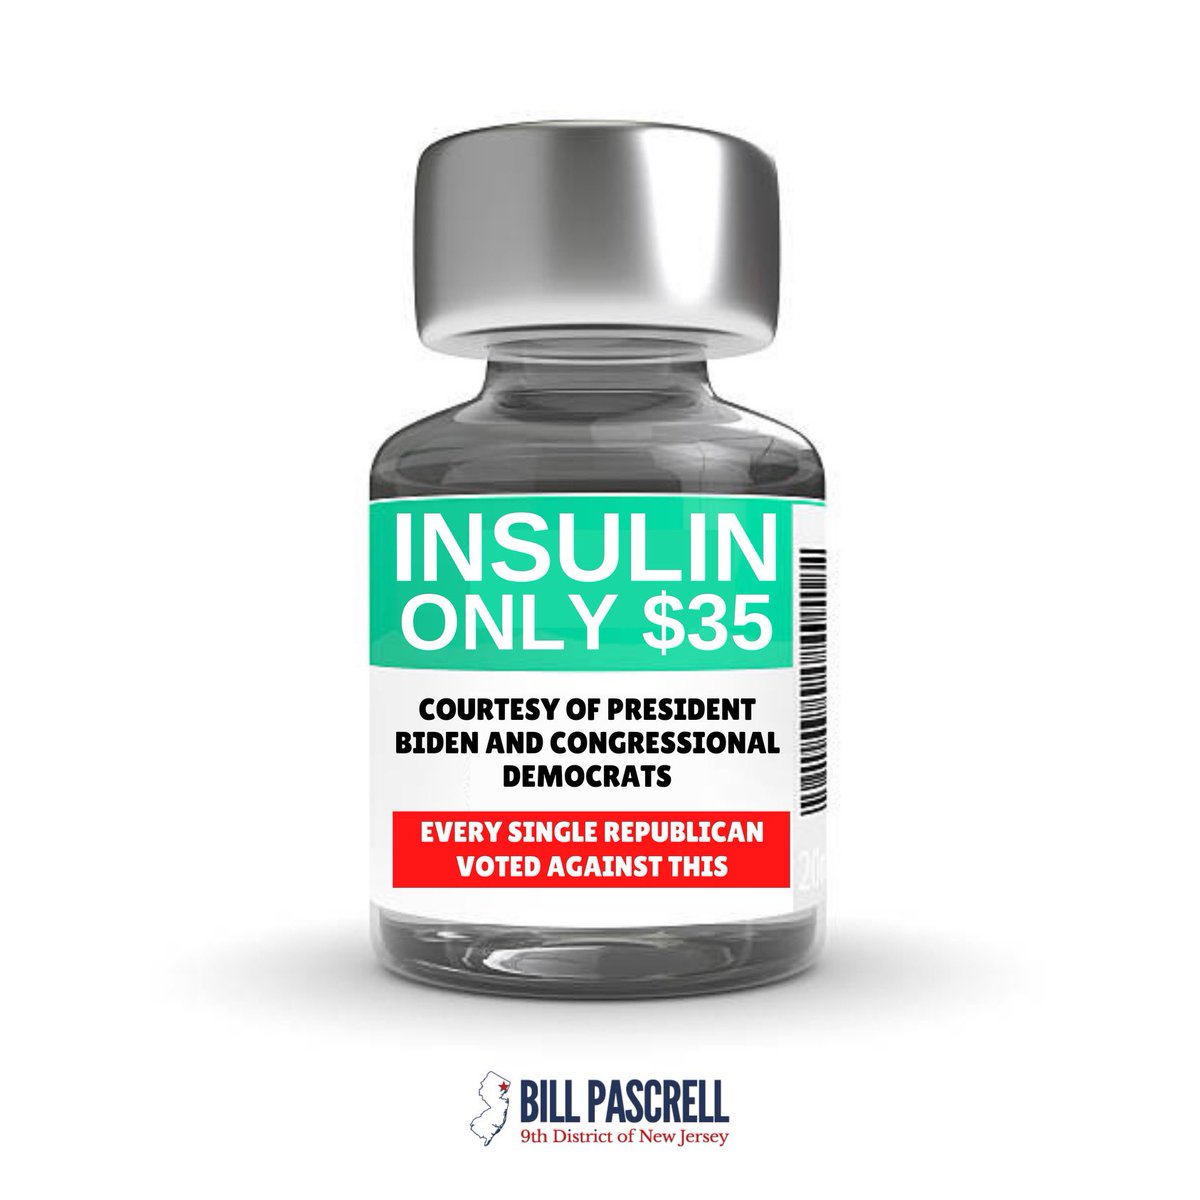 Regular reminder that when Democrats capped the price of insulin at $35 for millions every single republican in Congress voted no and told millions of Americans to drop dead